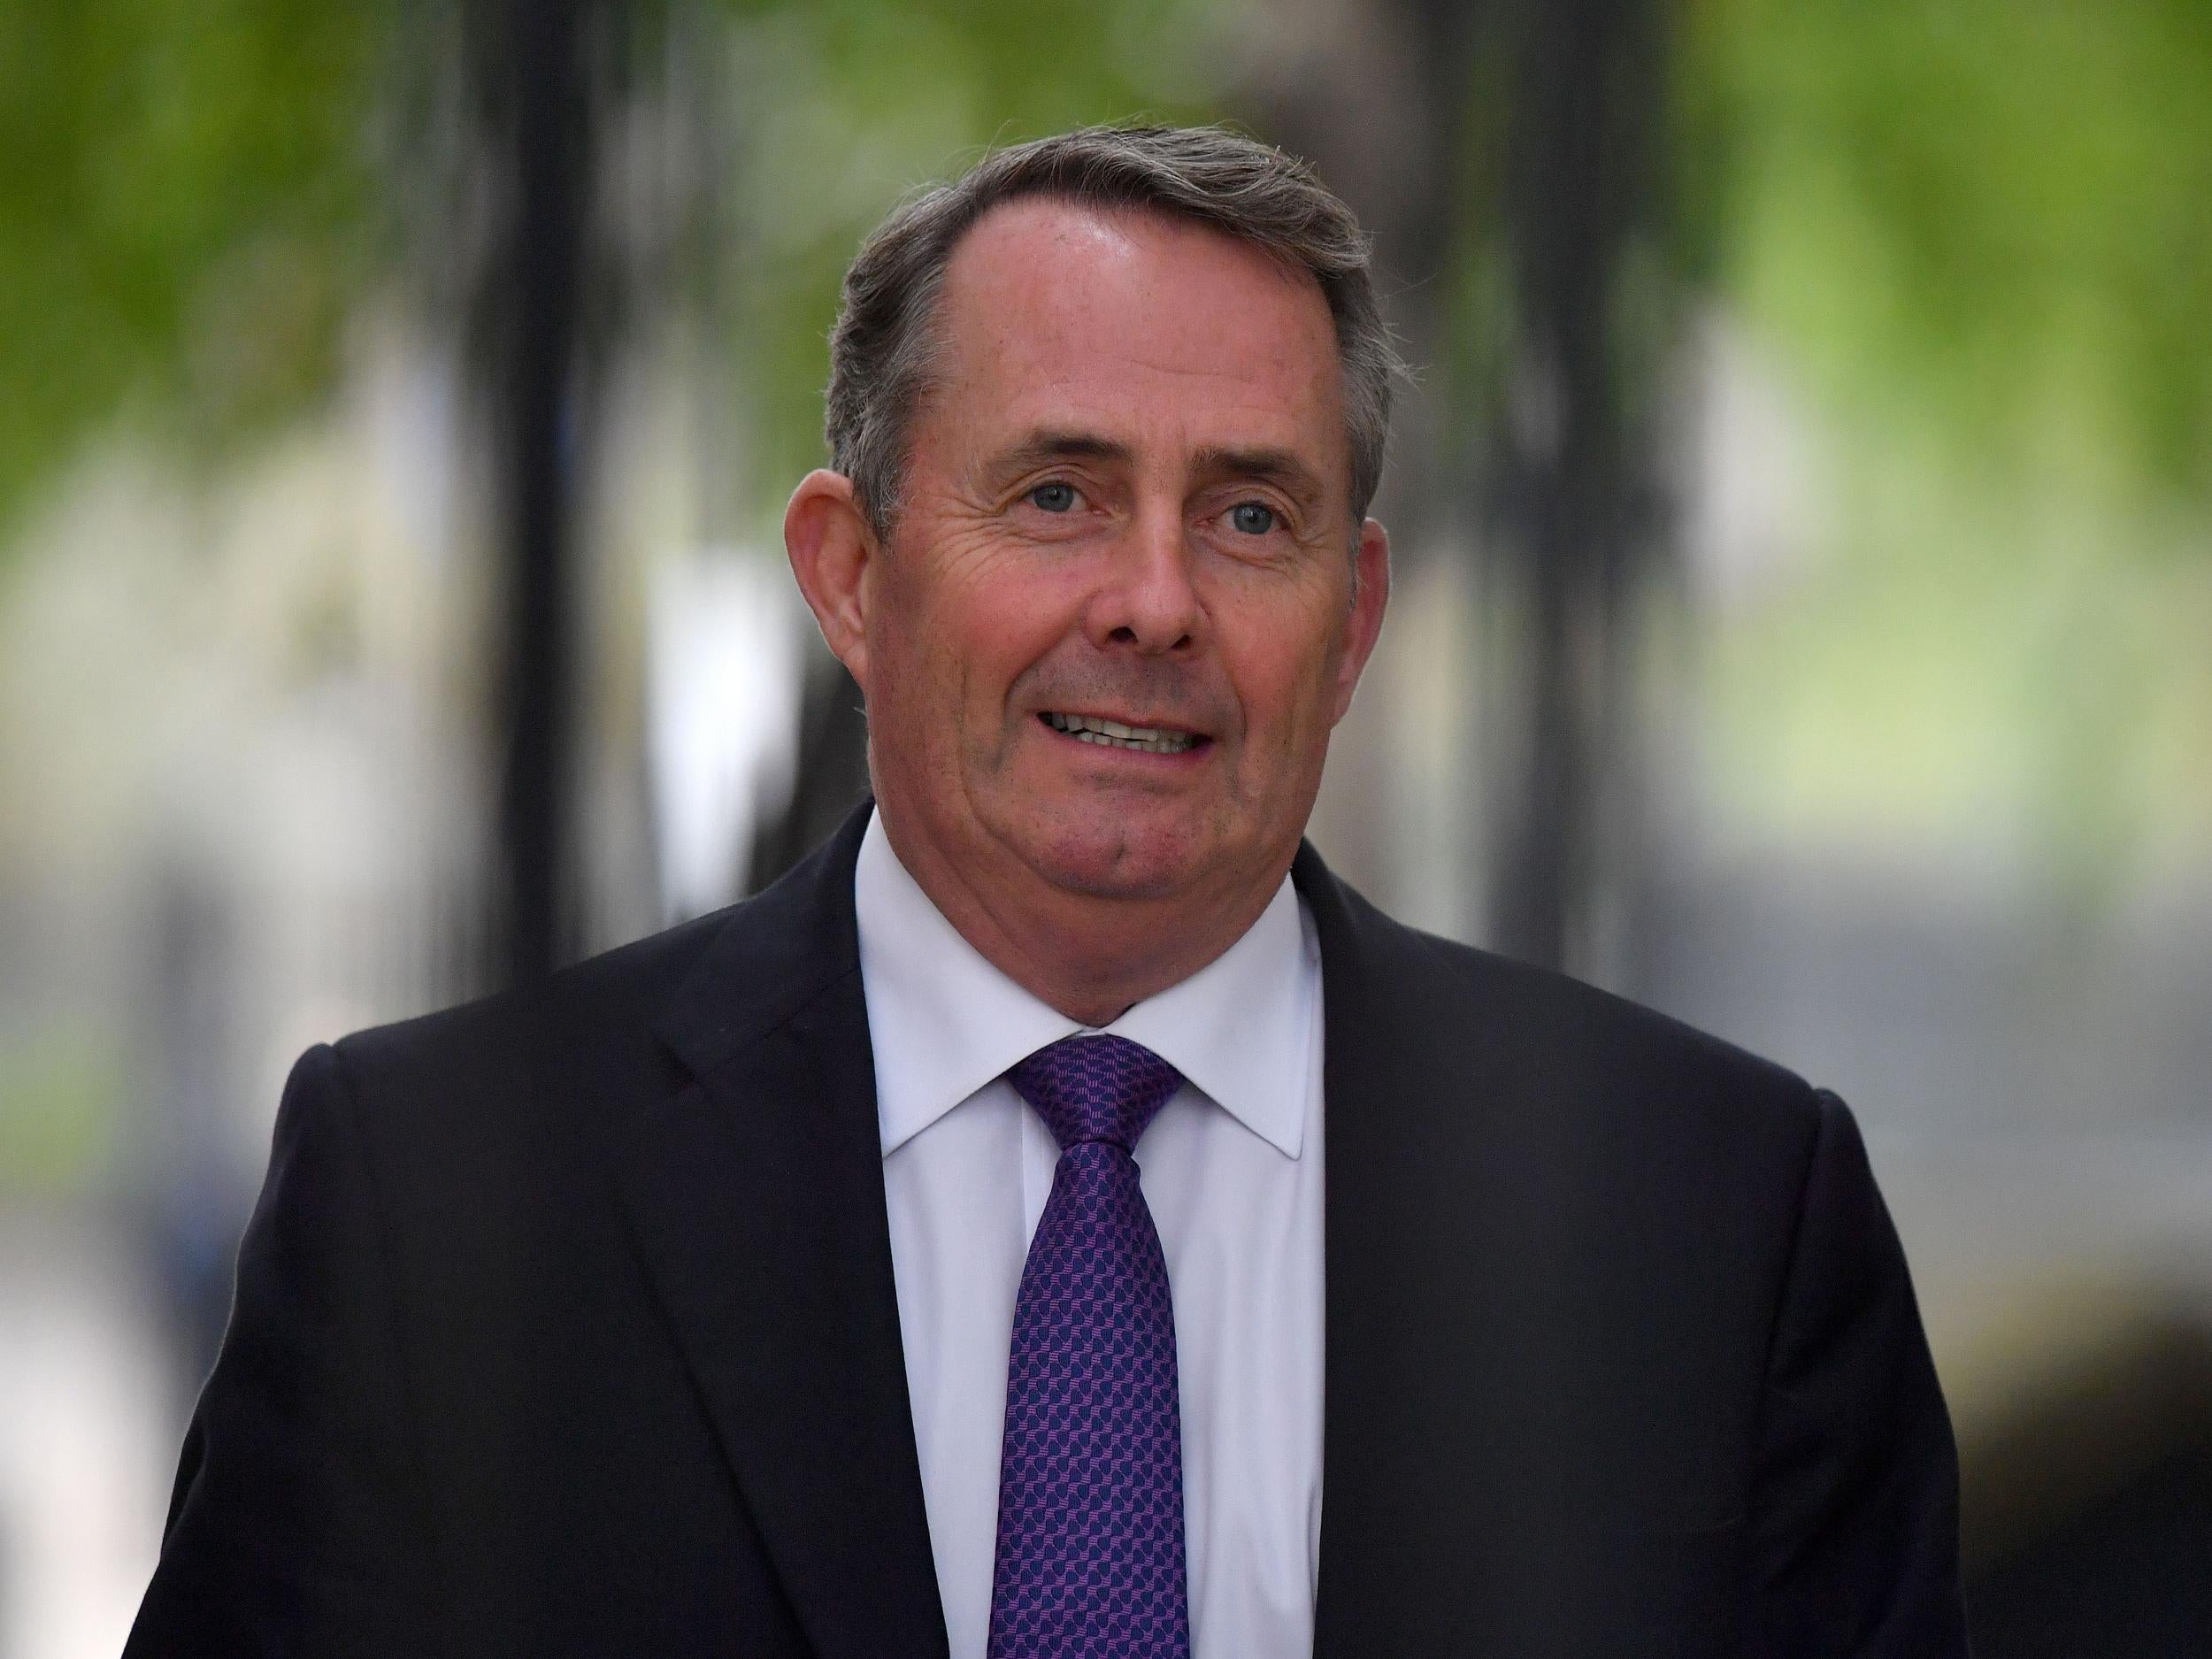 Liam Fox insisted that Parliament ‘take back control’; instead he is doing everything to ensure his department’s deals are free from scrutiny and debate